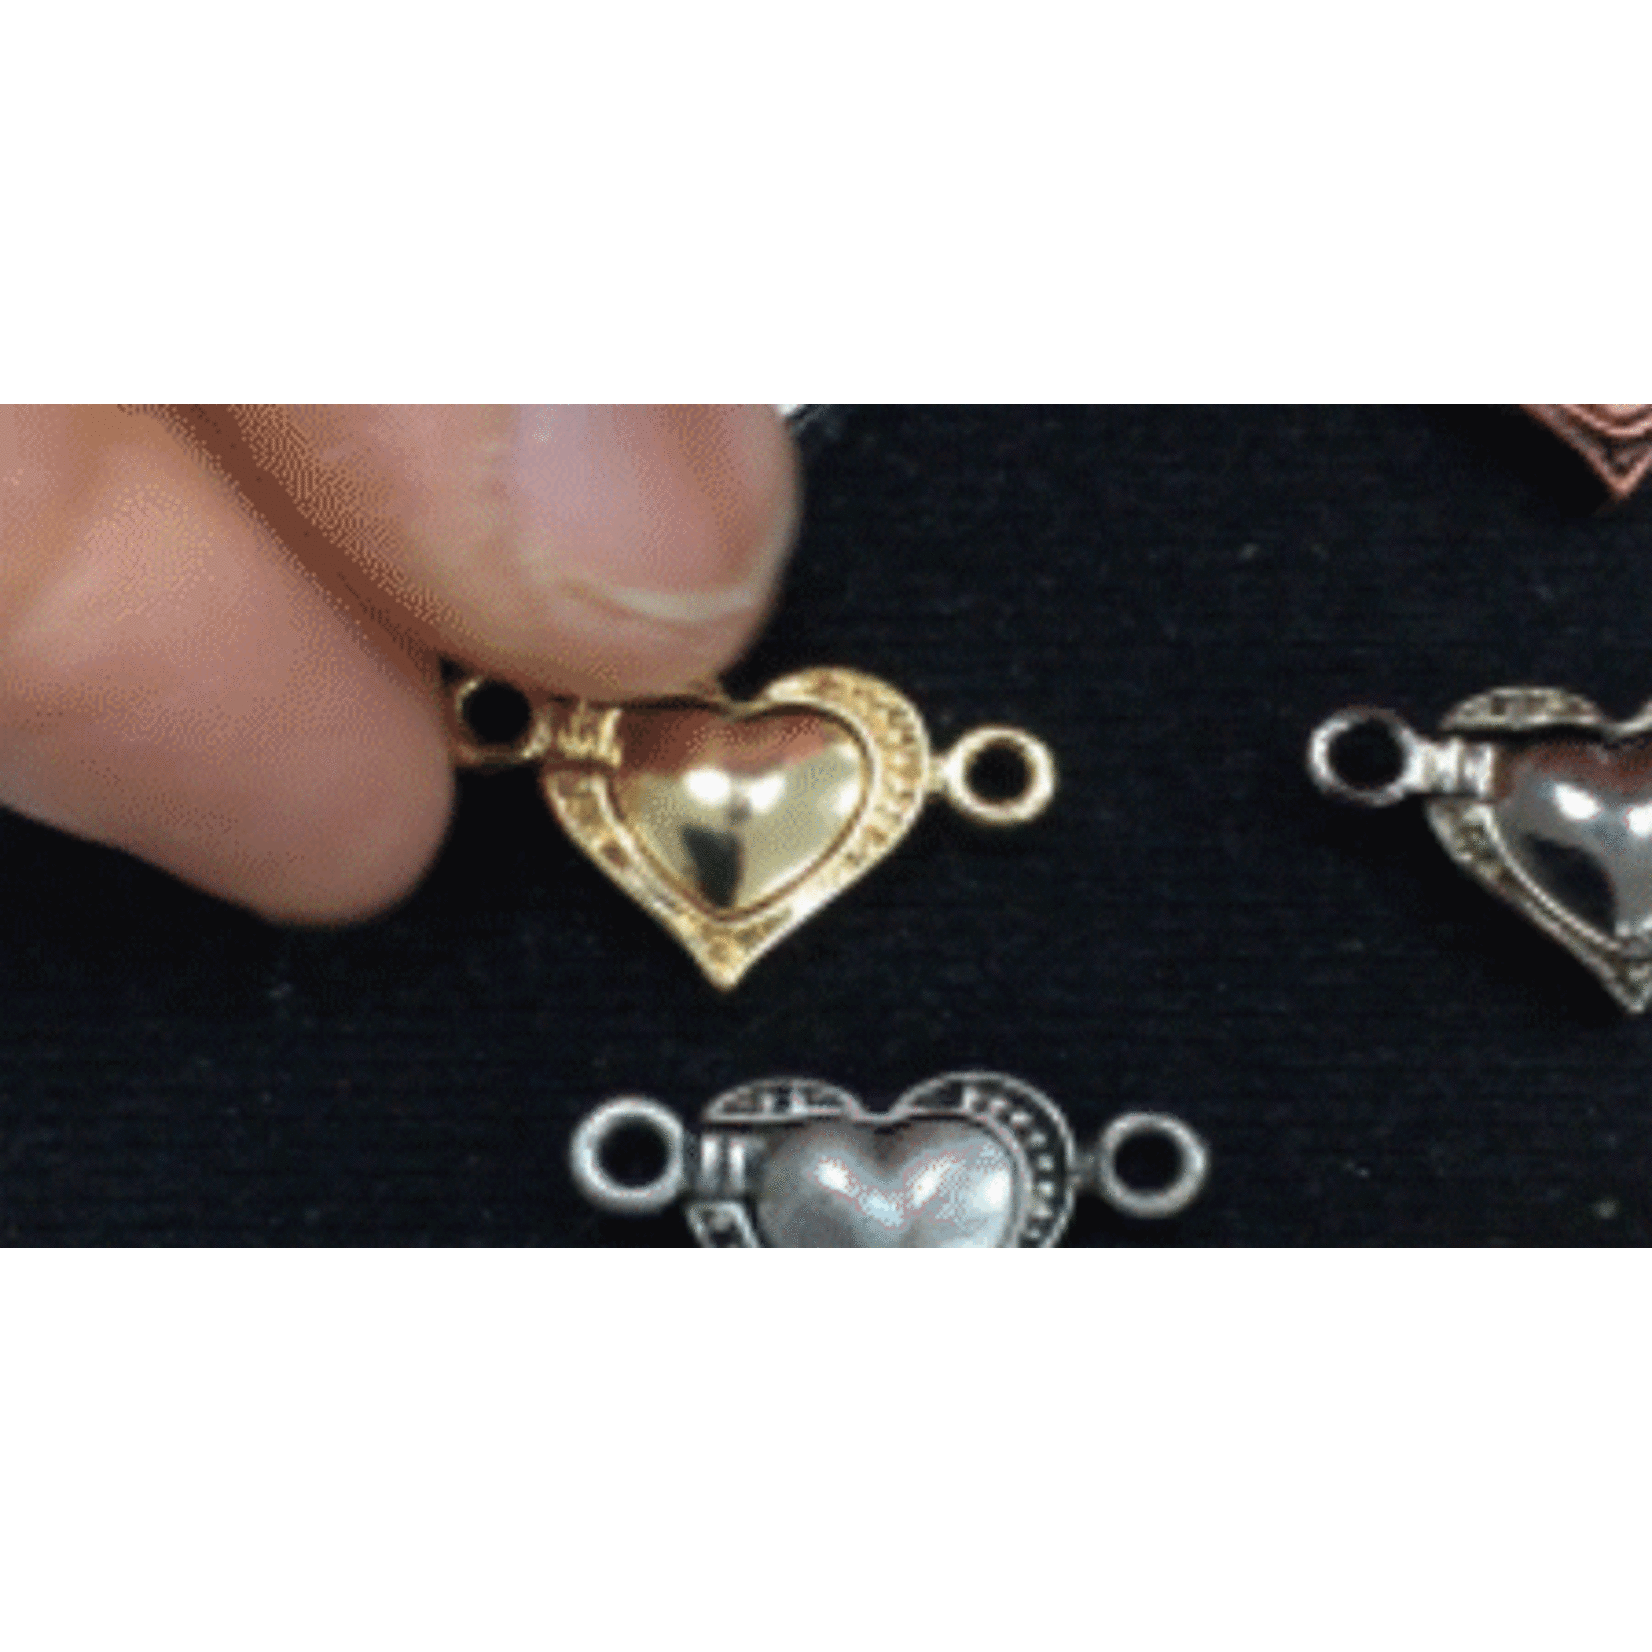 Heart Magnetic Clasp Antique Brass Nickel-Free Plated